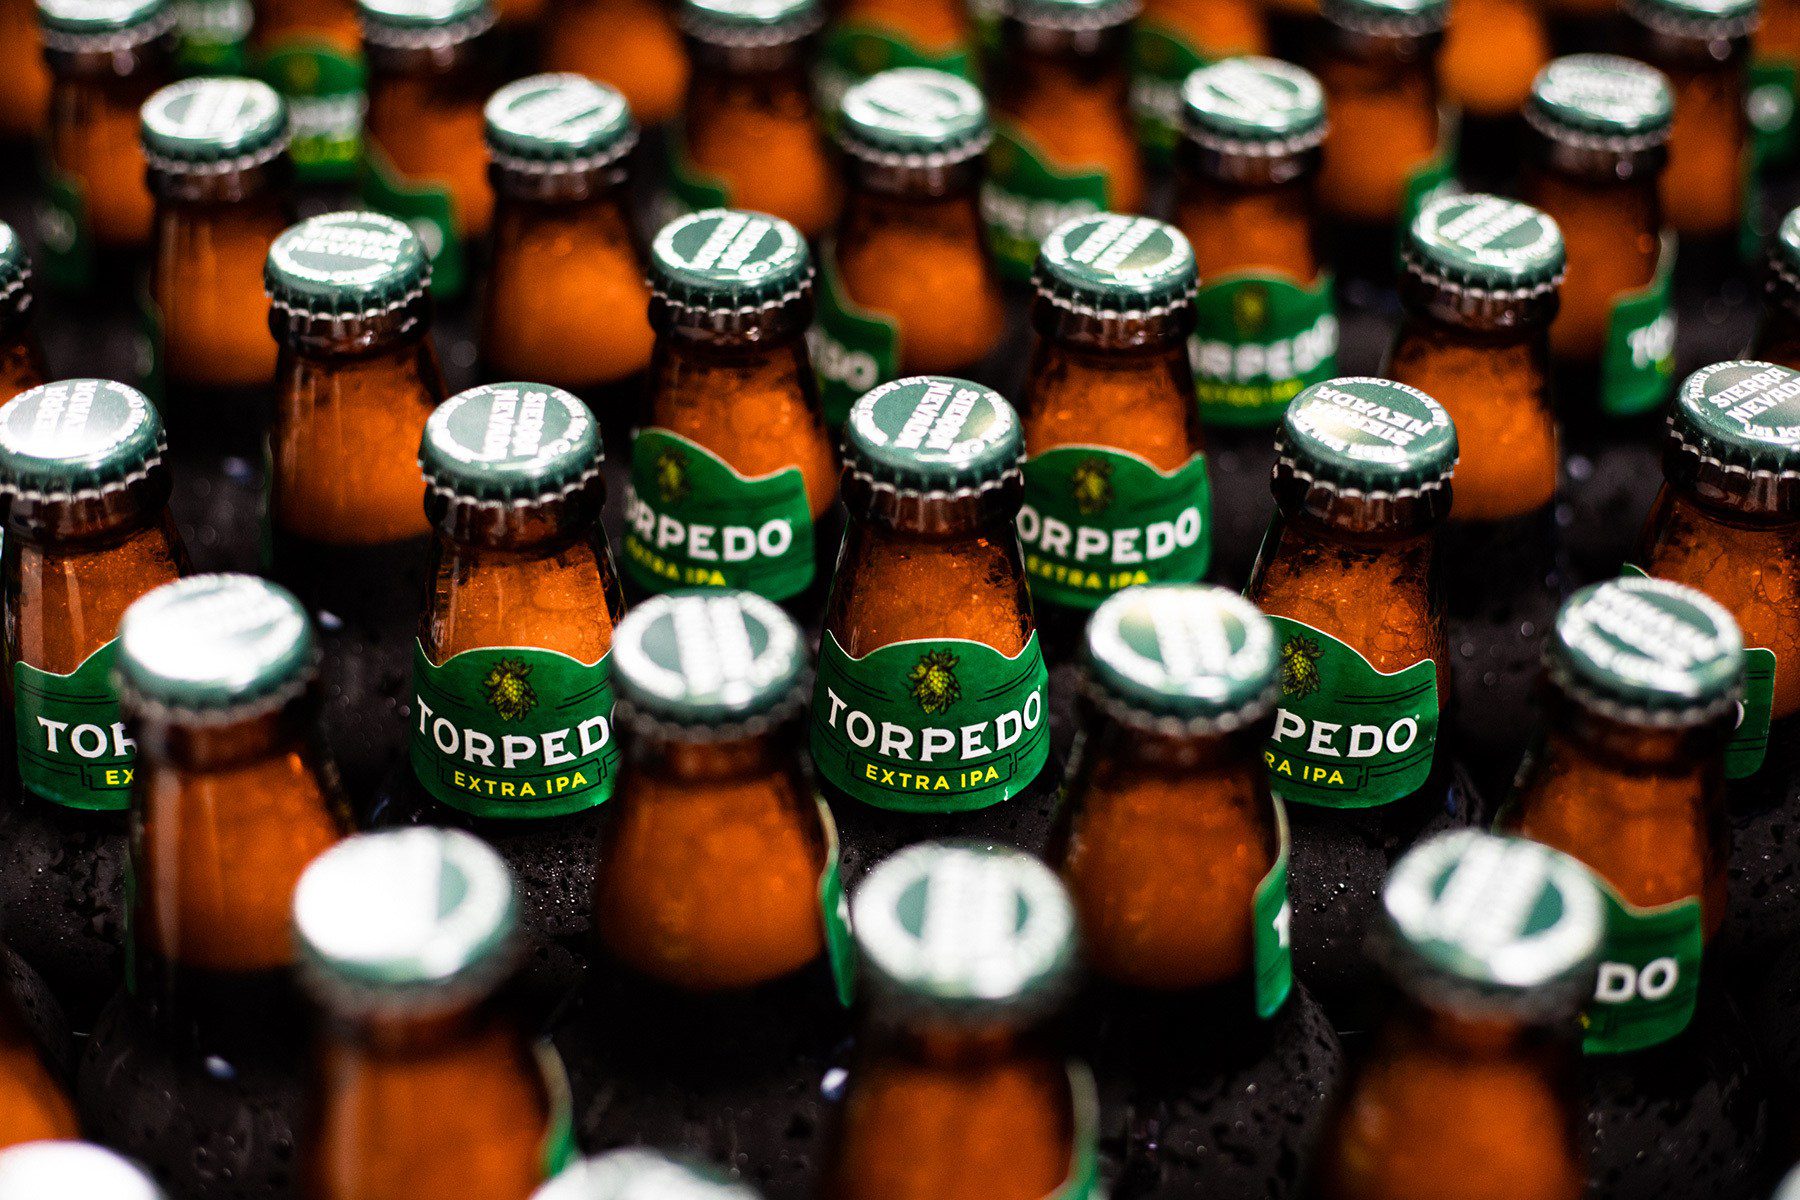 Dozens of bottles of Torpedo IPA on the packaging line at Sierra Nevada Brewing Company